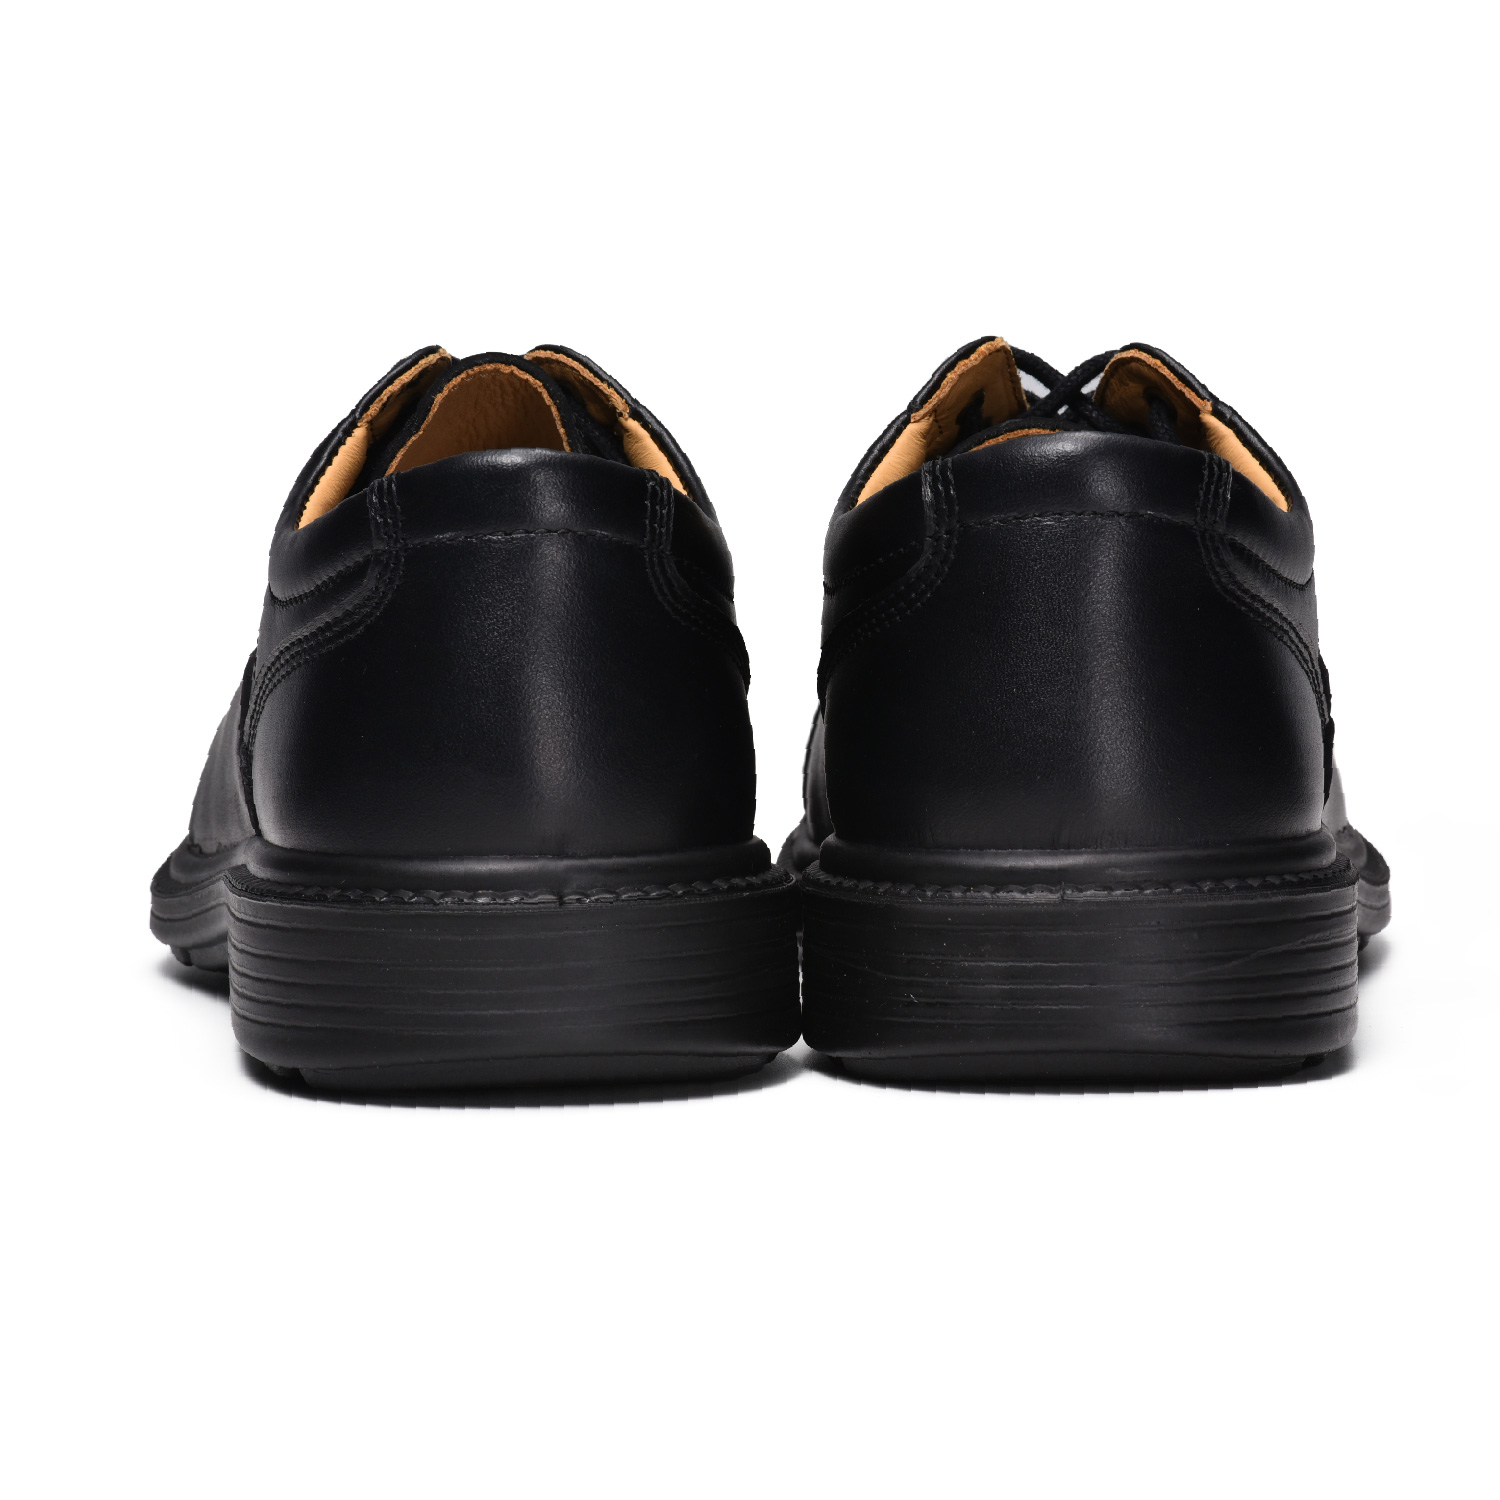 S3 Leather Safety Shoes for Executive & Manager with Steel Toe L-7527